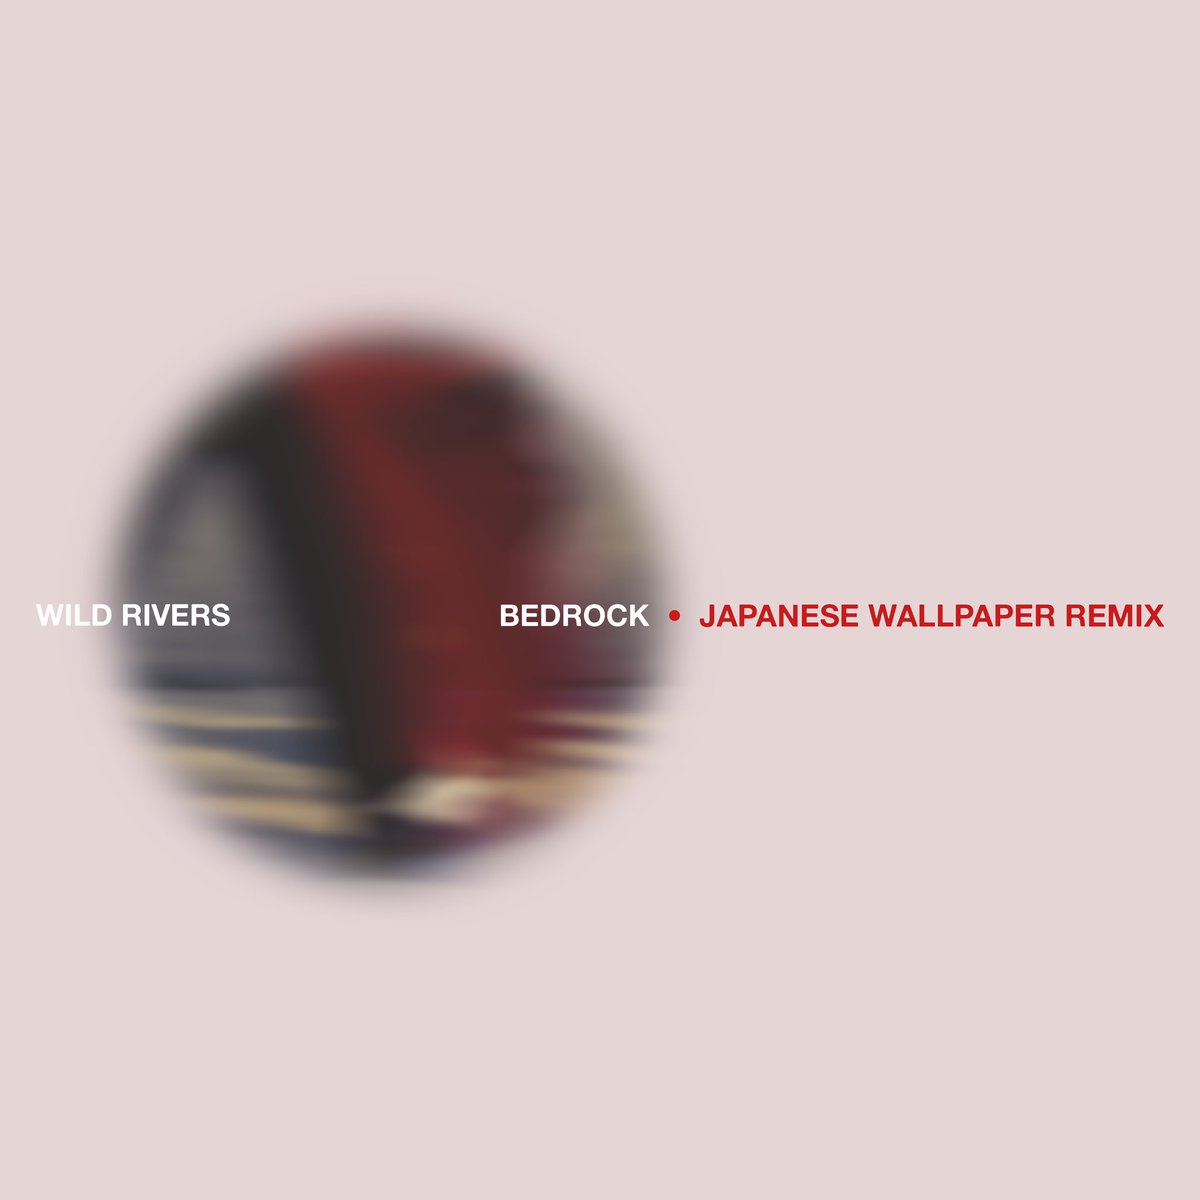 Always very cool and inspiring to hear other artists reimagine our songs. Bedrock (Japanese Wallpaper remix) out Friday.